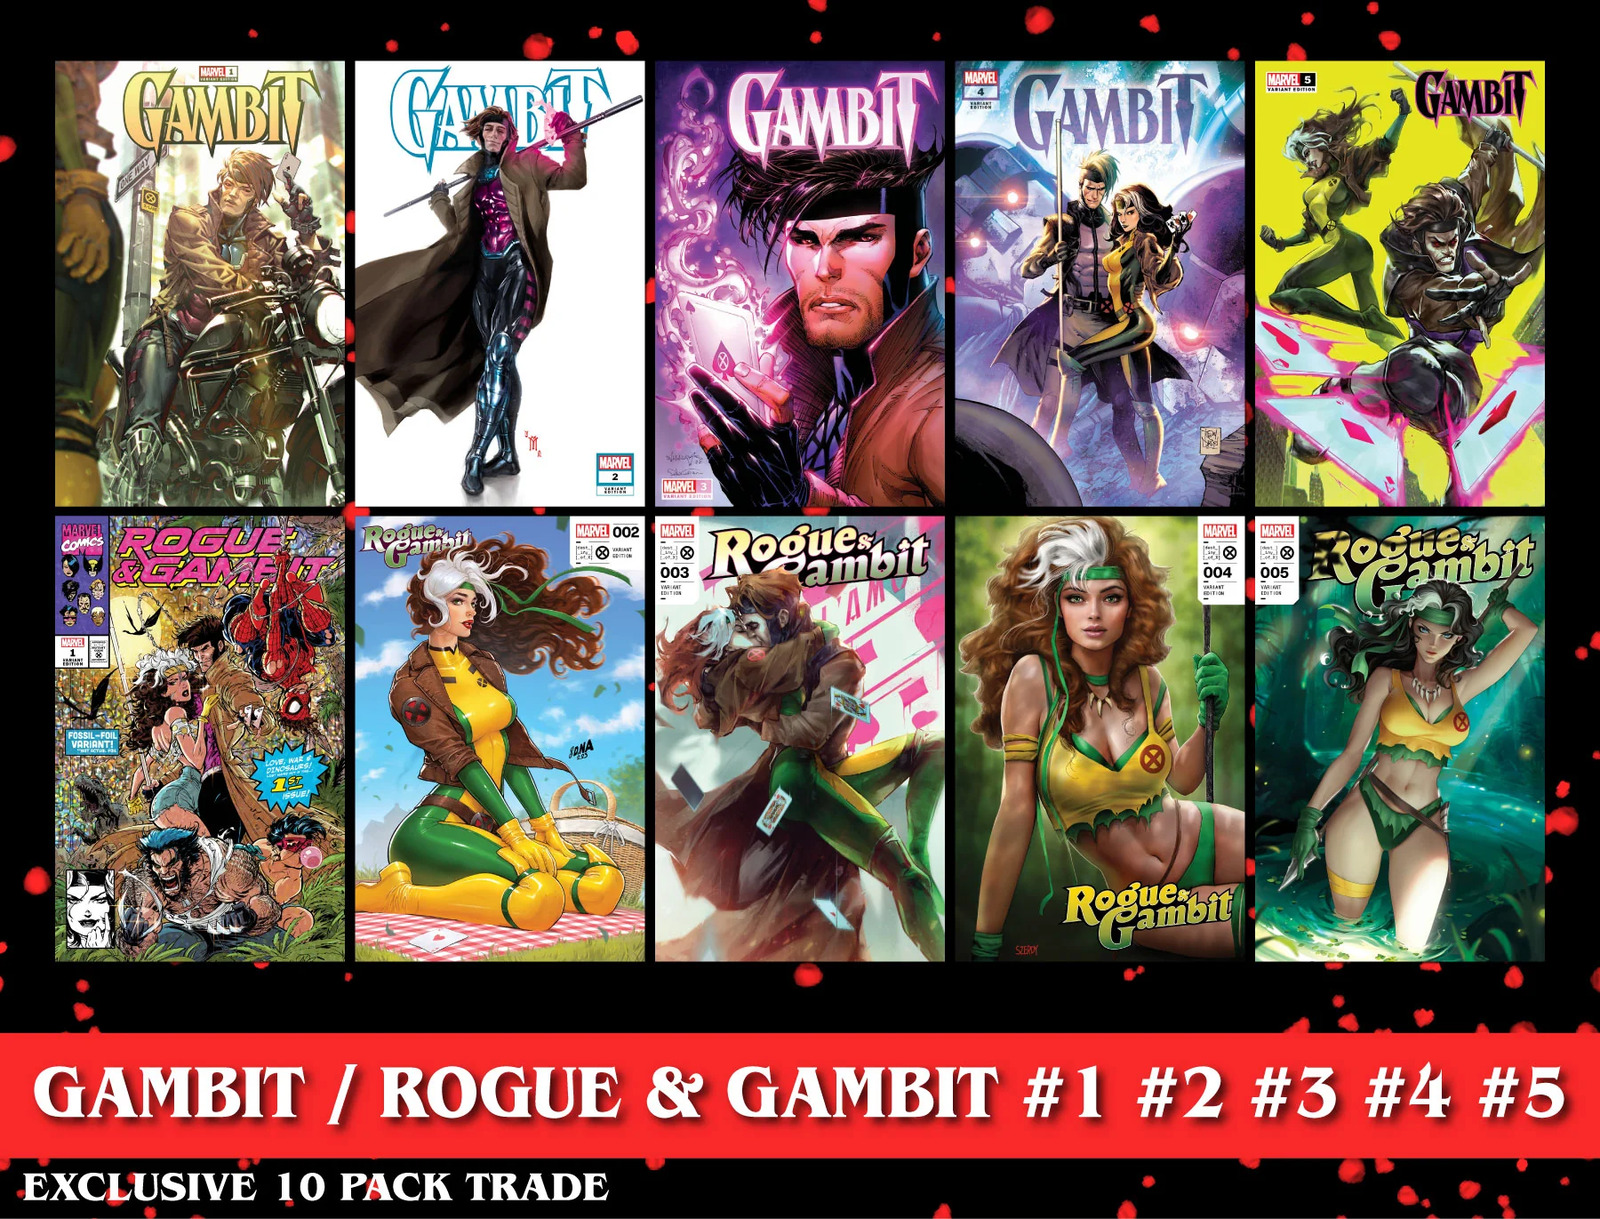 [10 PACK TRADE] GAMBIT / ROGUE & GAMBIT #1 #2 #3 #4 #5 UNKNOWN COMICS EXCLUSIVE